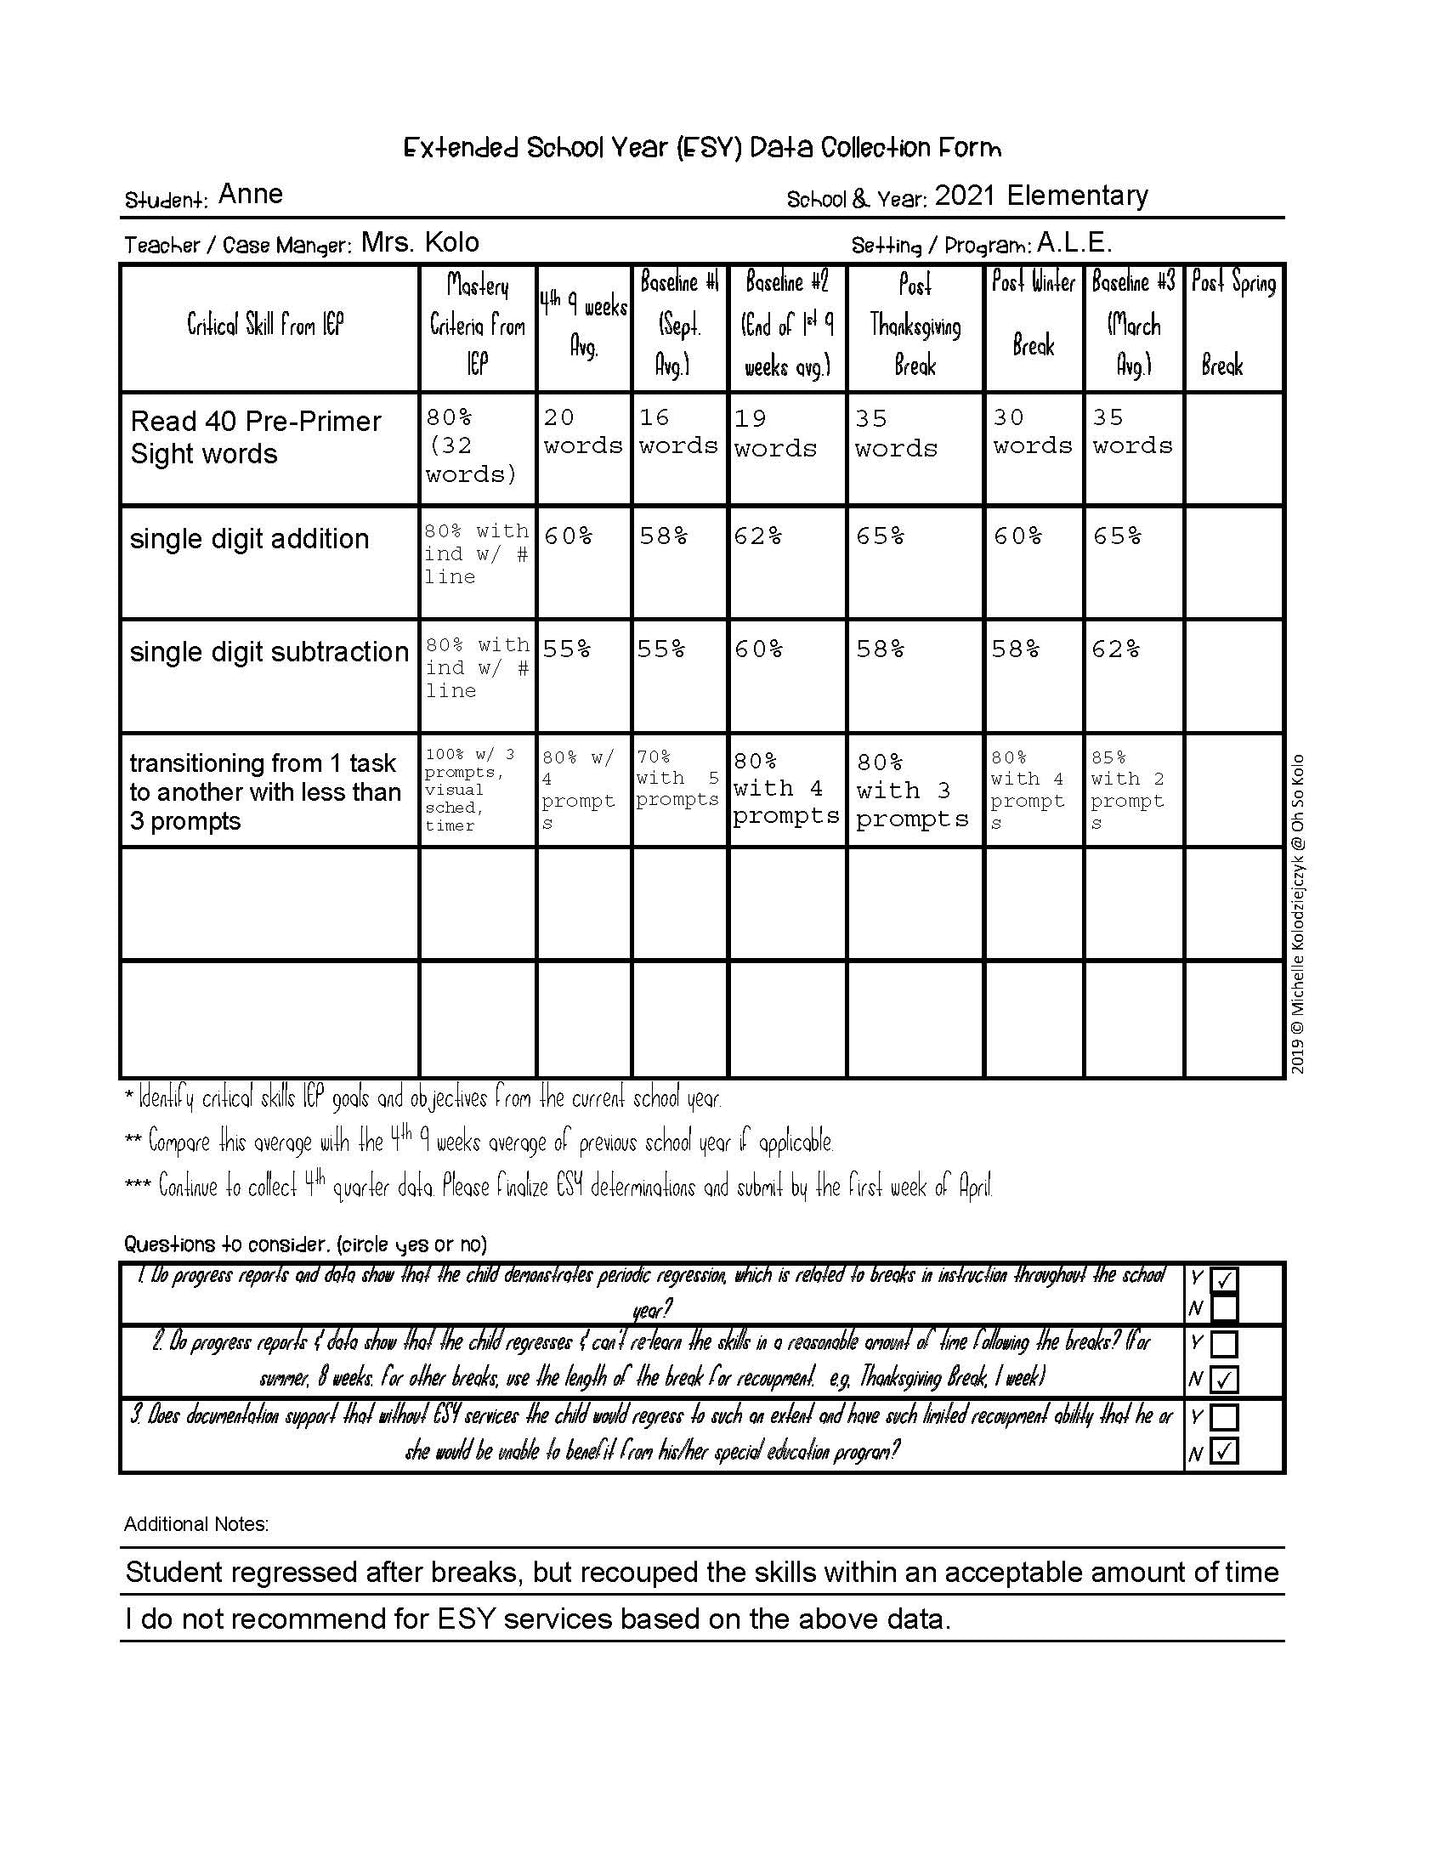 Extended School Year Qualification Form